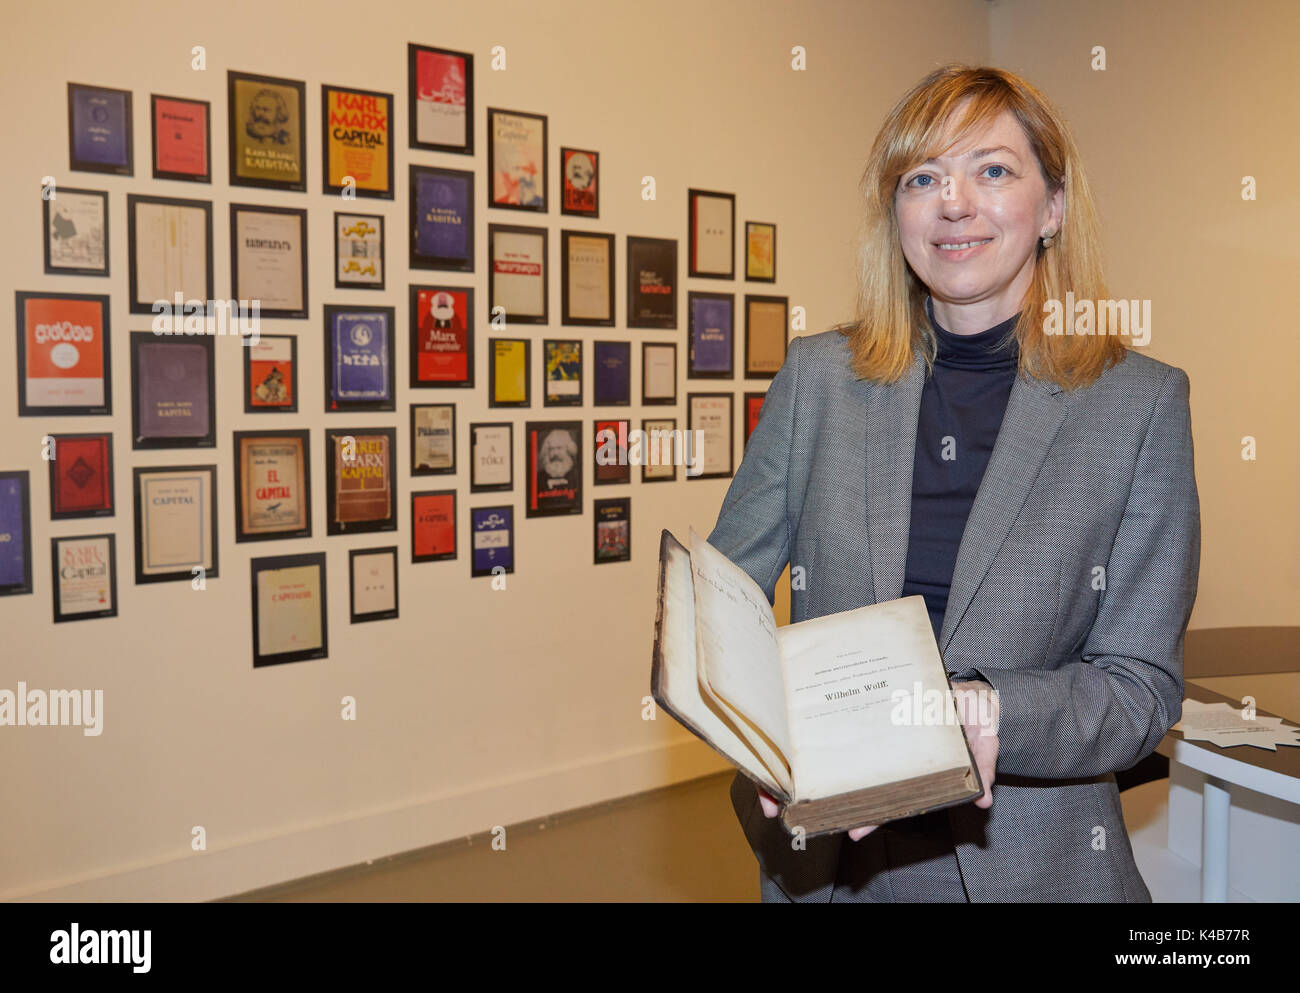 Hamburg, Germany. 5th Sep, 2017. The director Rita Mueller holds an original first edition book of 'Das Kapital' of Karl Marx in the Museum of Work in Hamburg, Germany, 5 September 2017. The special exhibition is held for the 150th jubilee of the publishing of the first band of Marx's 'Capital'. The exhibition can be seen between the 6th of September 2017 and the 4th of March 2018. Photo: Georg Wendt/dpa/Alamy Live News Stock Photo